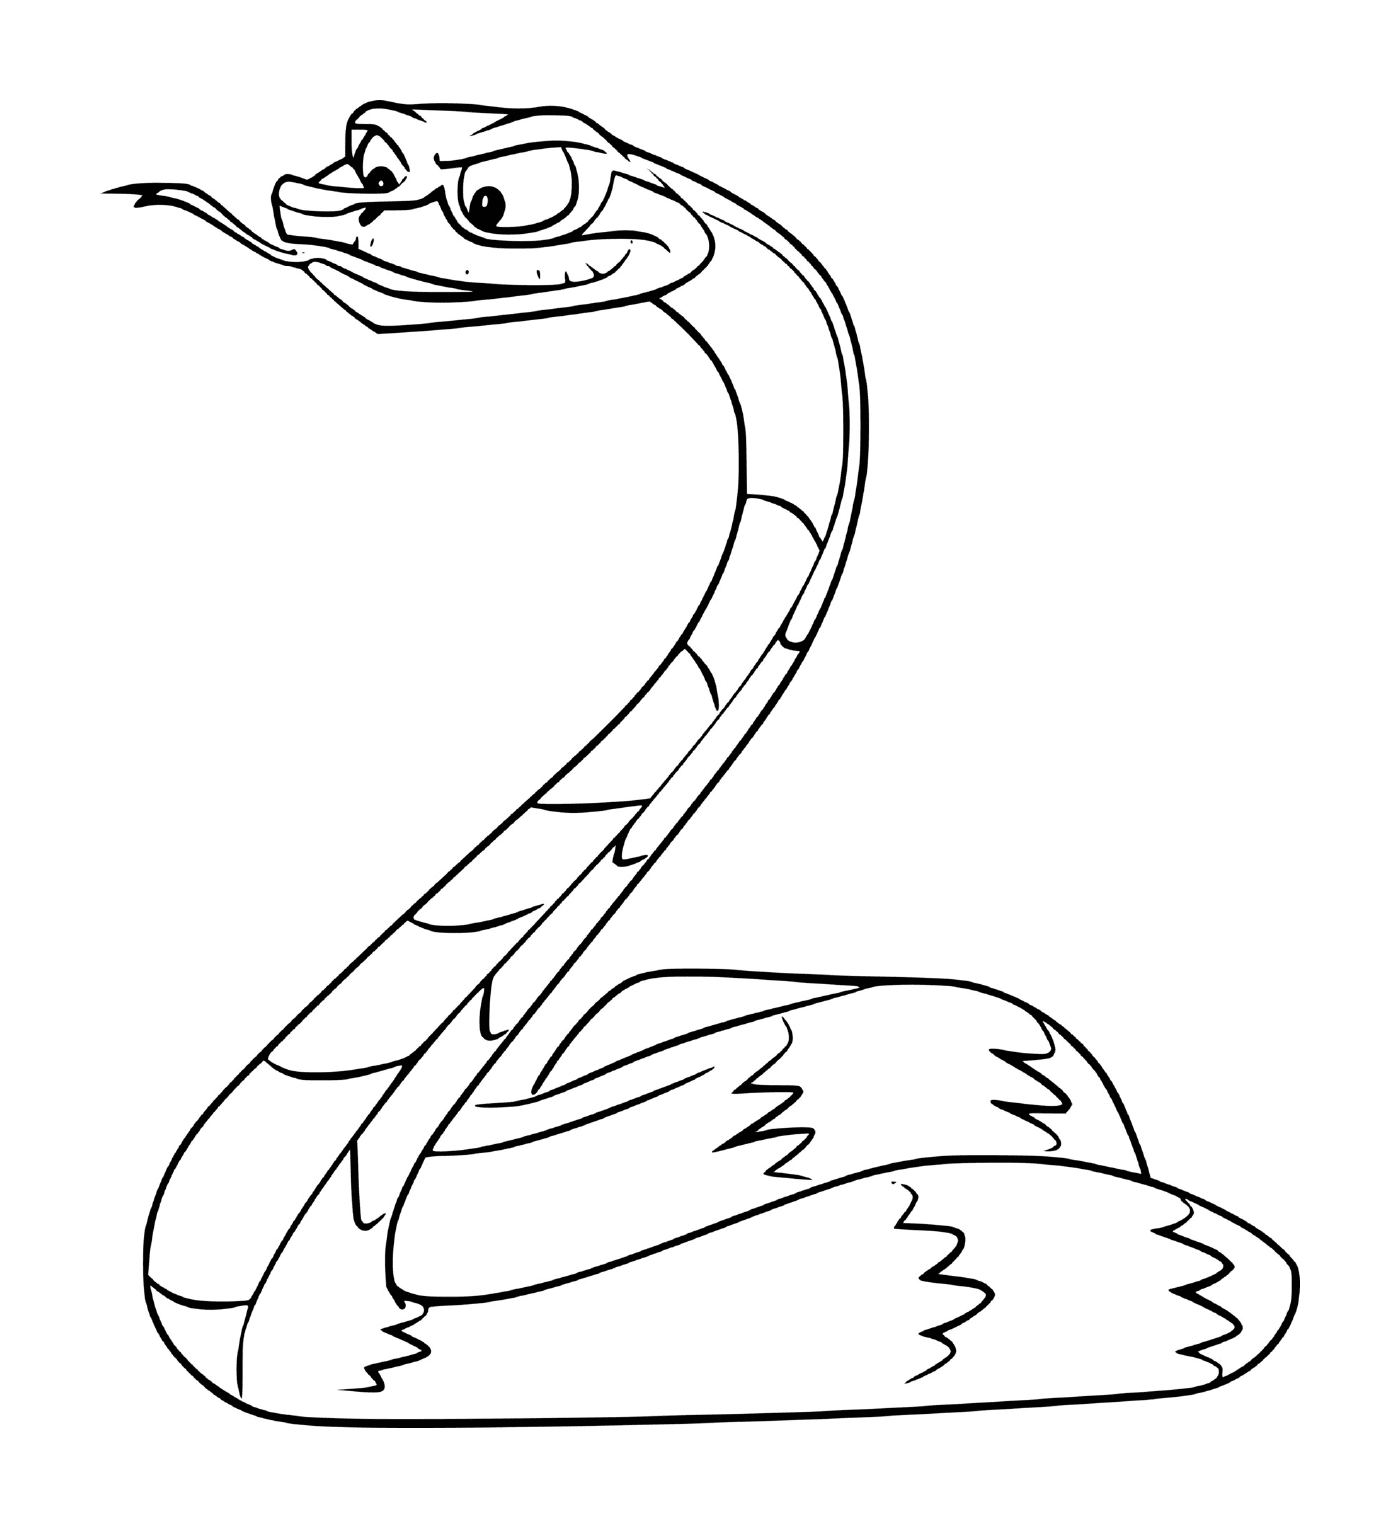  Serpent of the Lion King's Guard 